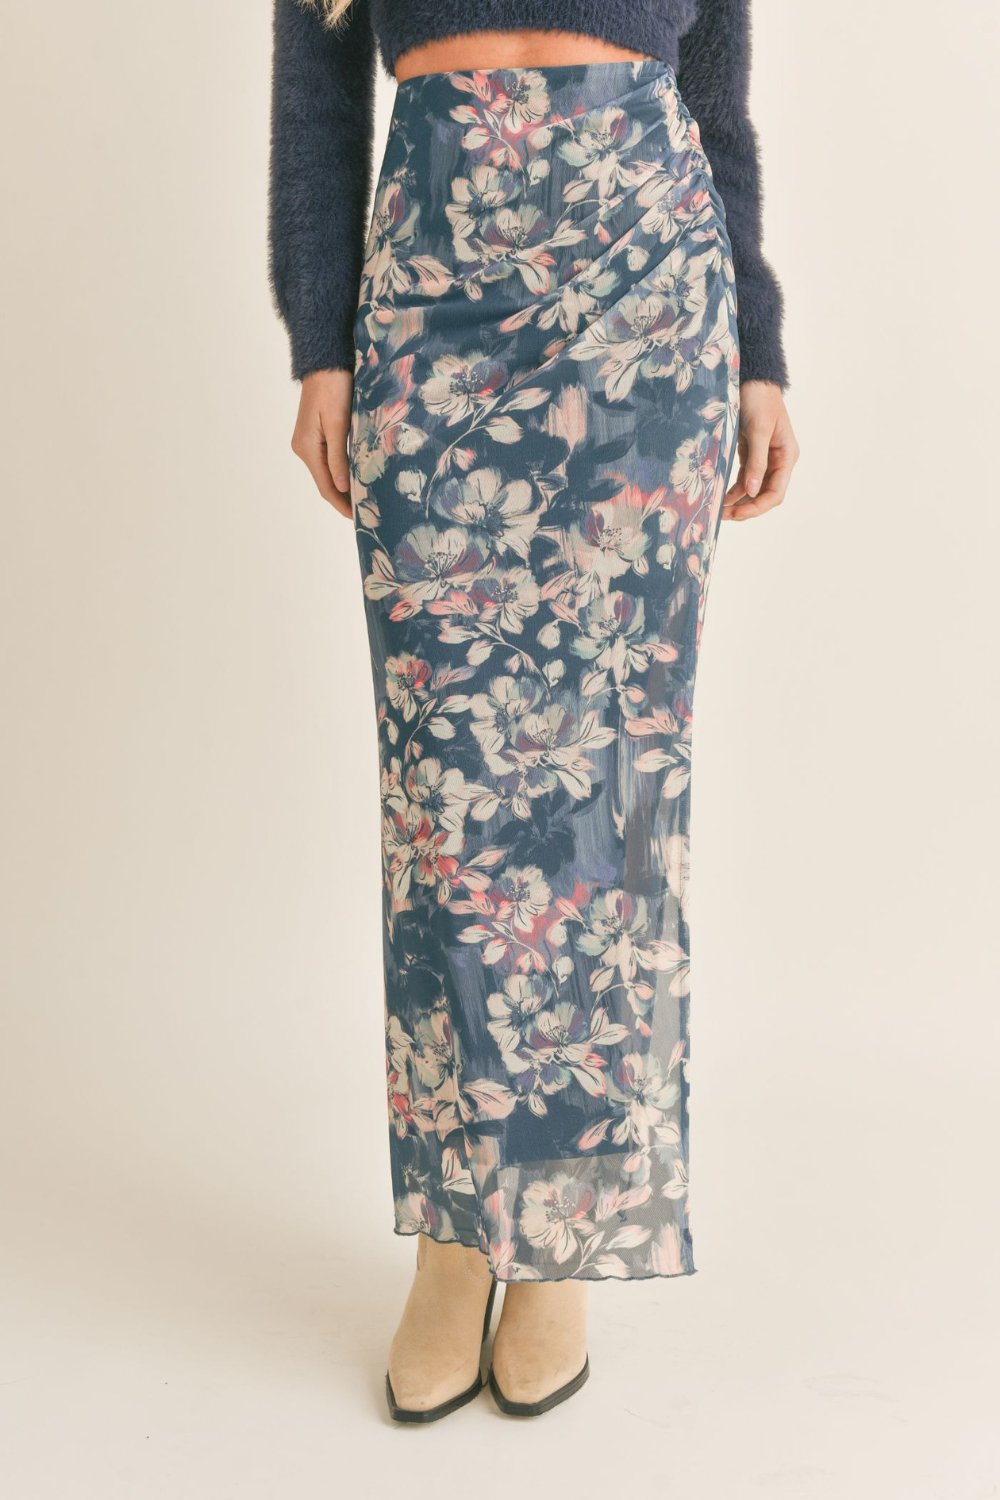 Women's Mystic Floral Maxi Skirt | Blue Multi - Women's Skirts - Blooming Daily